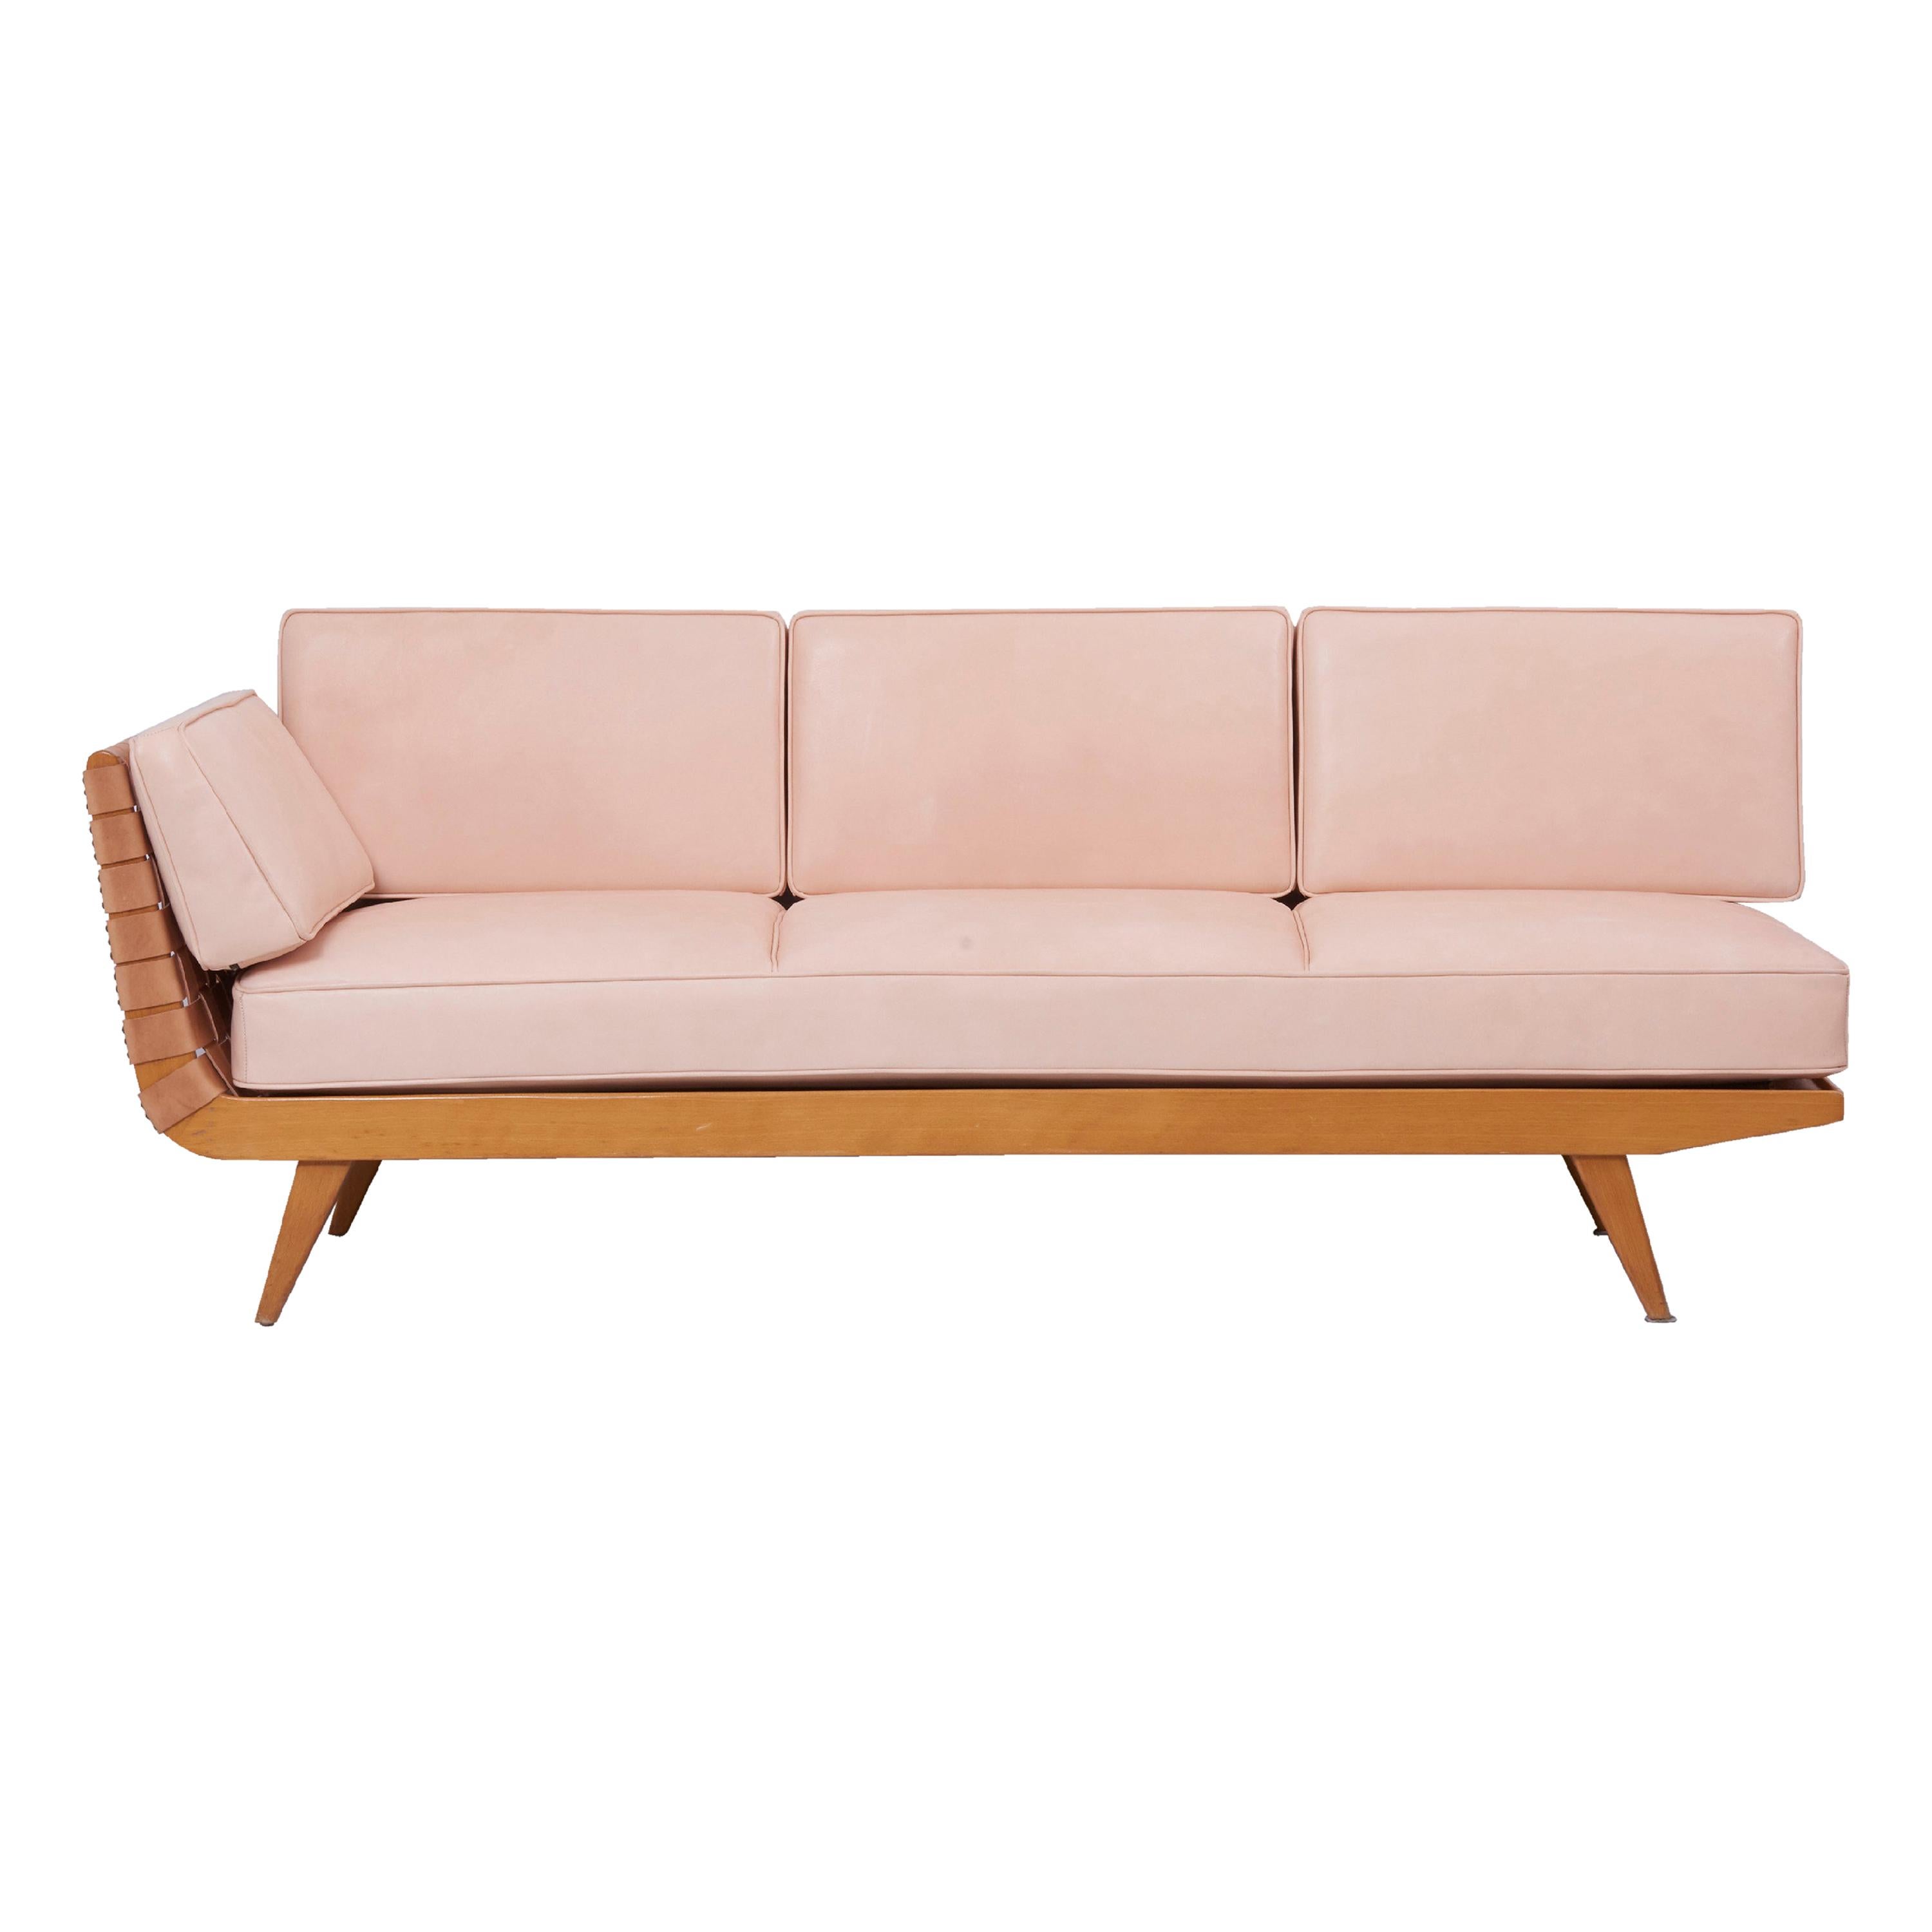 Newly Upholstered Daybed by Jens Risom for Walter Knoll 1950s in Leather